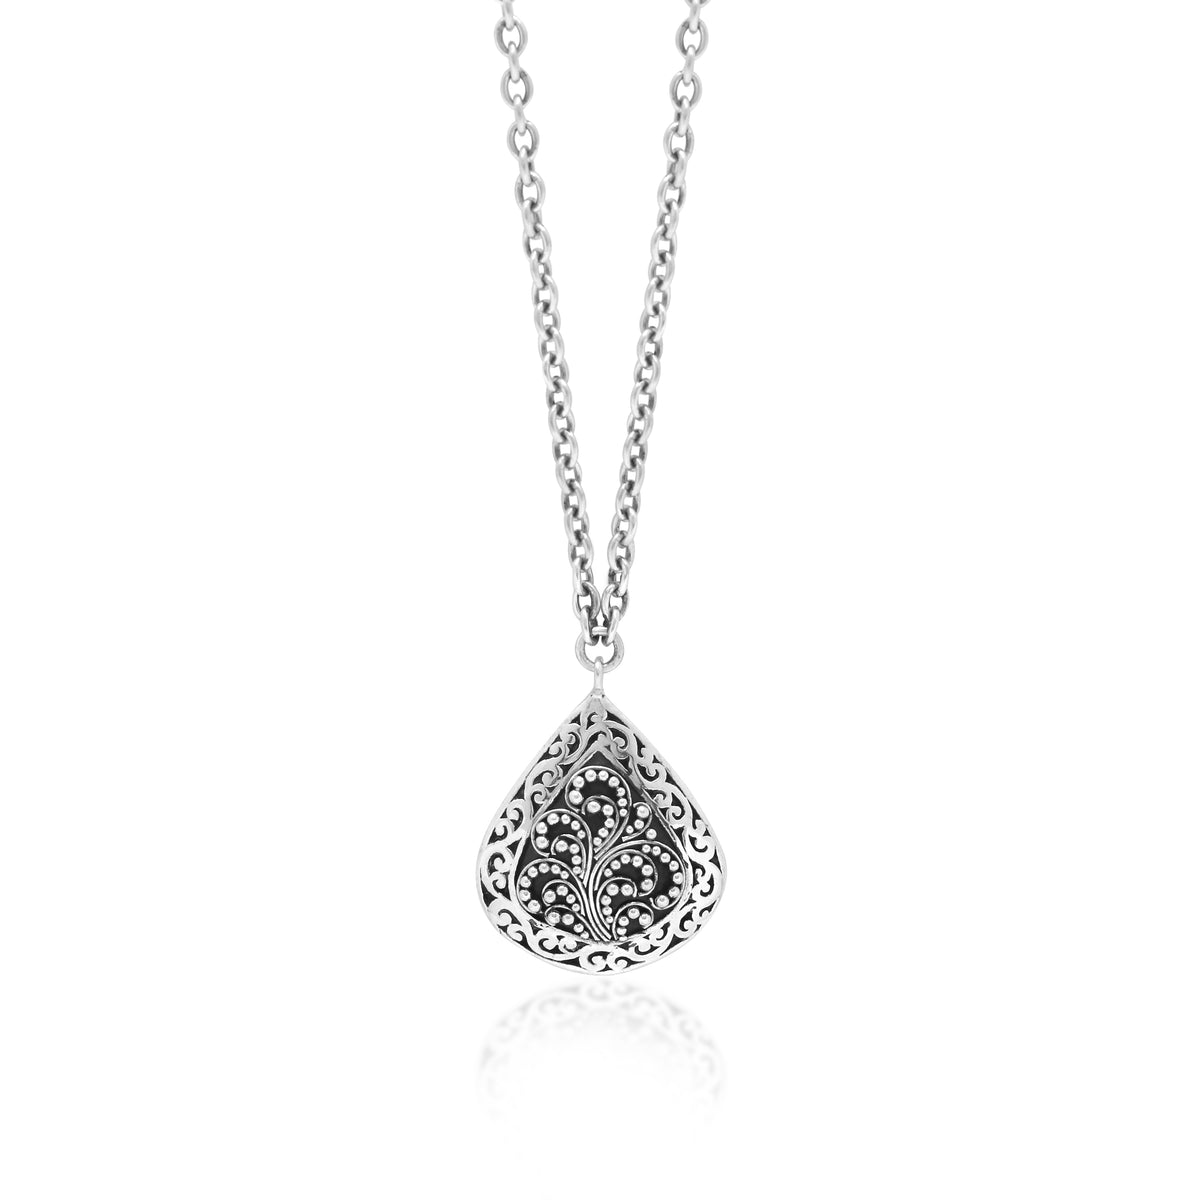 Classic Granulated with Signature Signature Scroll Border Teardrop Pendant Necklace. Pendant 19mm X 25mm 18" chain